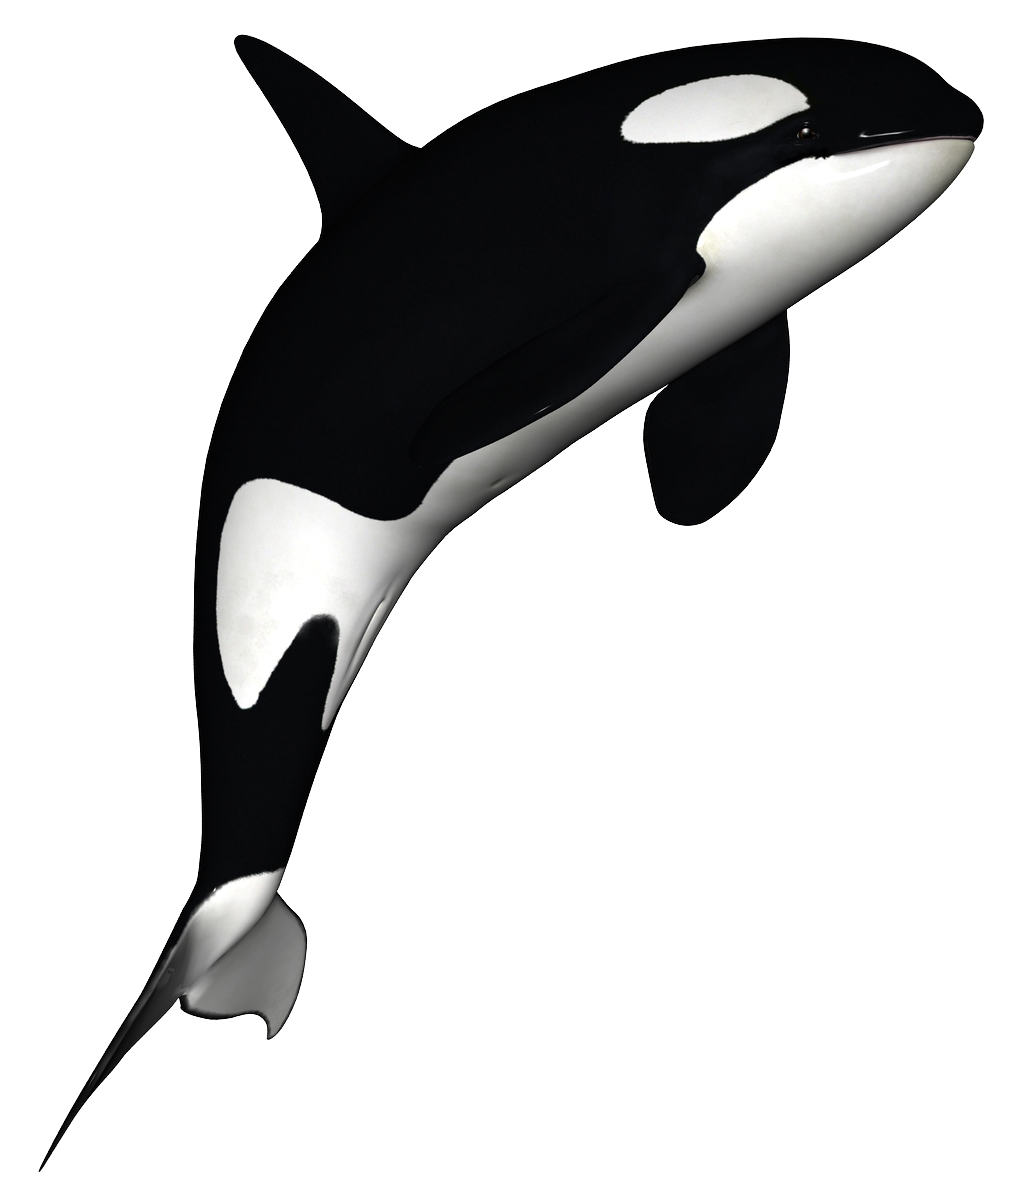 Killer Whale Png PNG Image